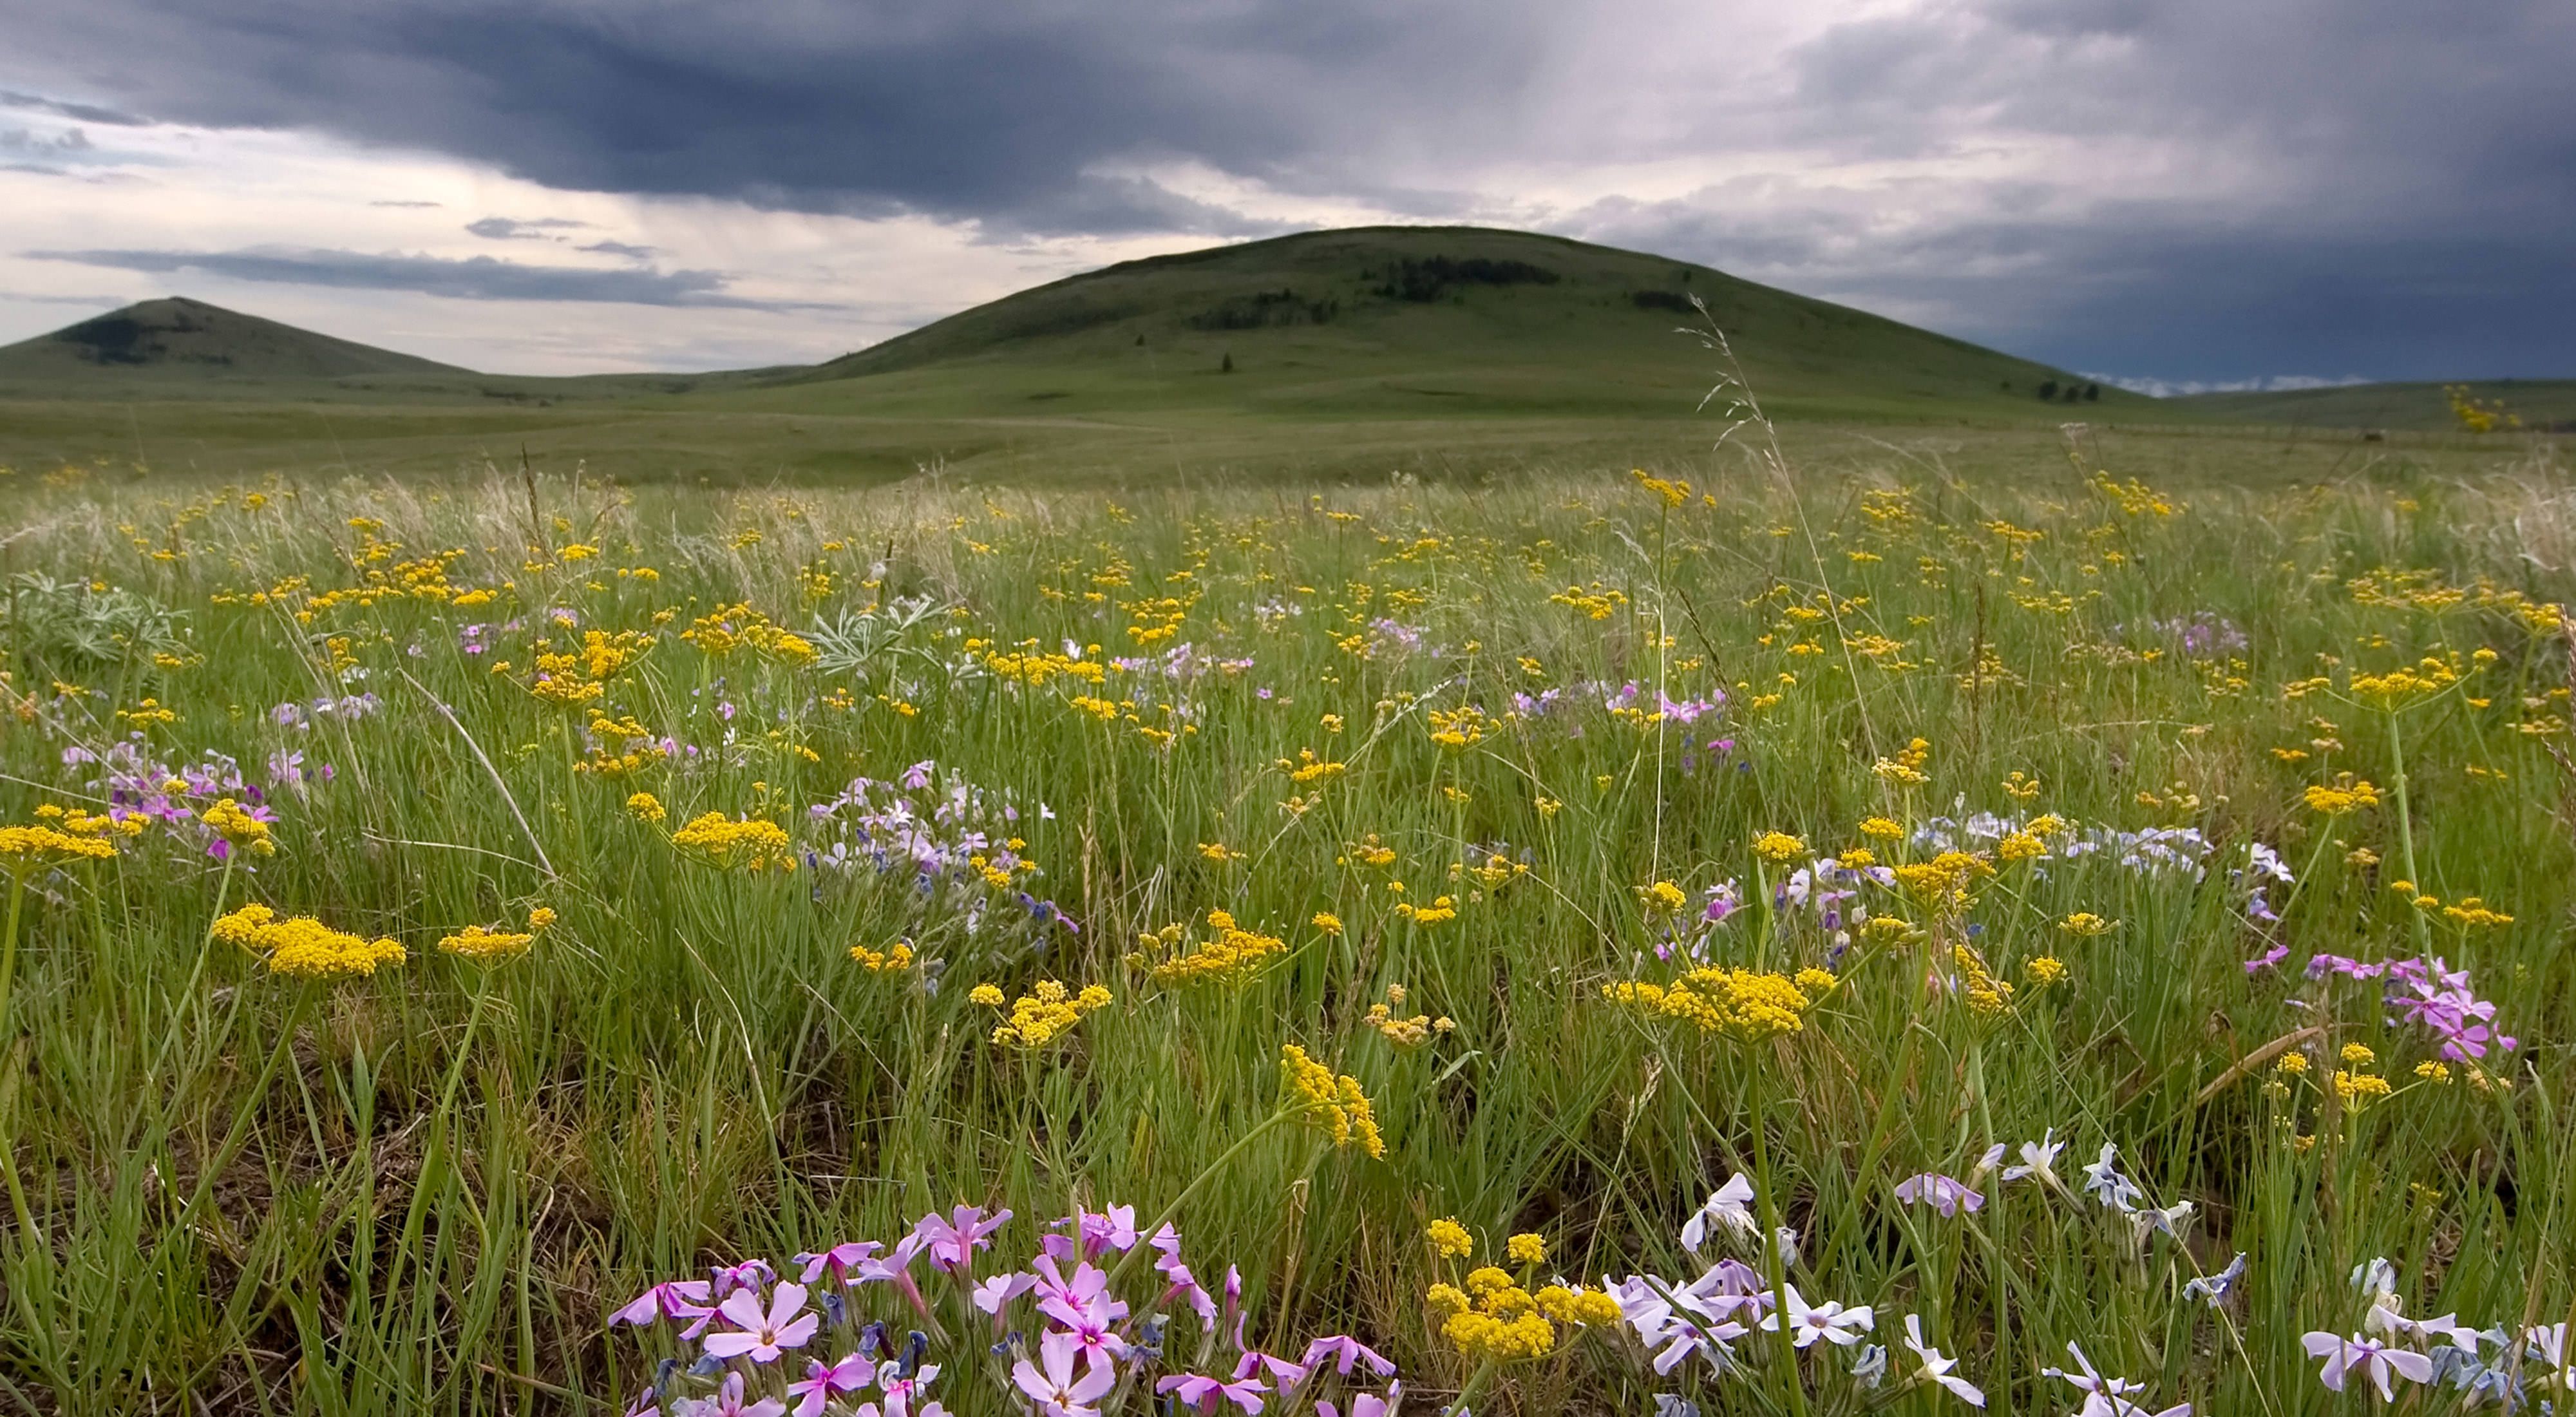 Purple and yellow wildflowers in a grassland with rounded hills in the background.